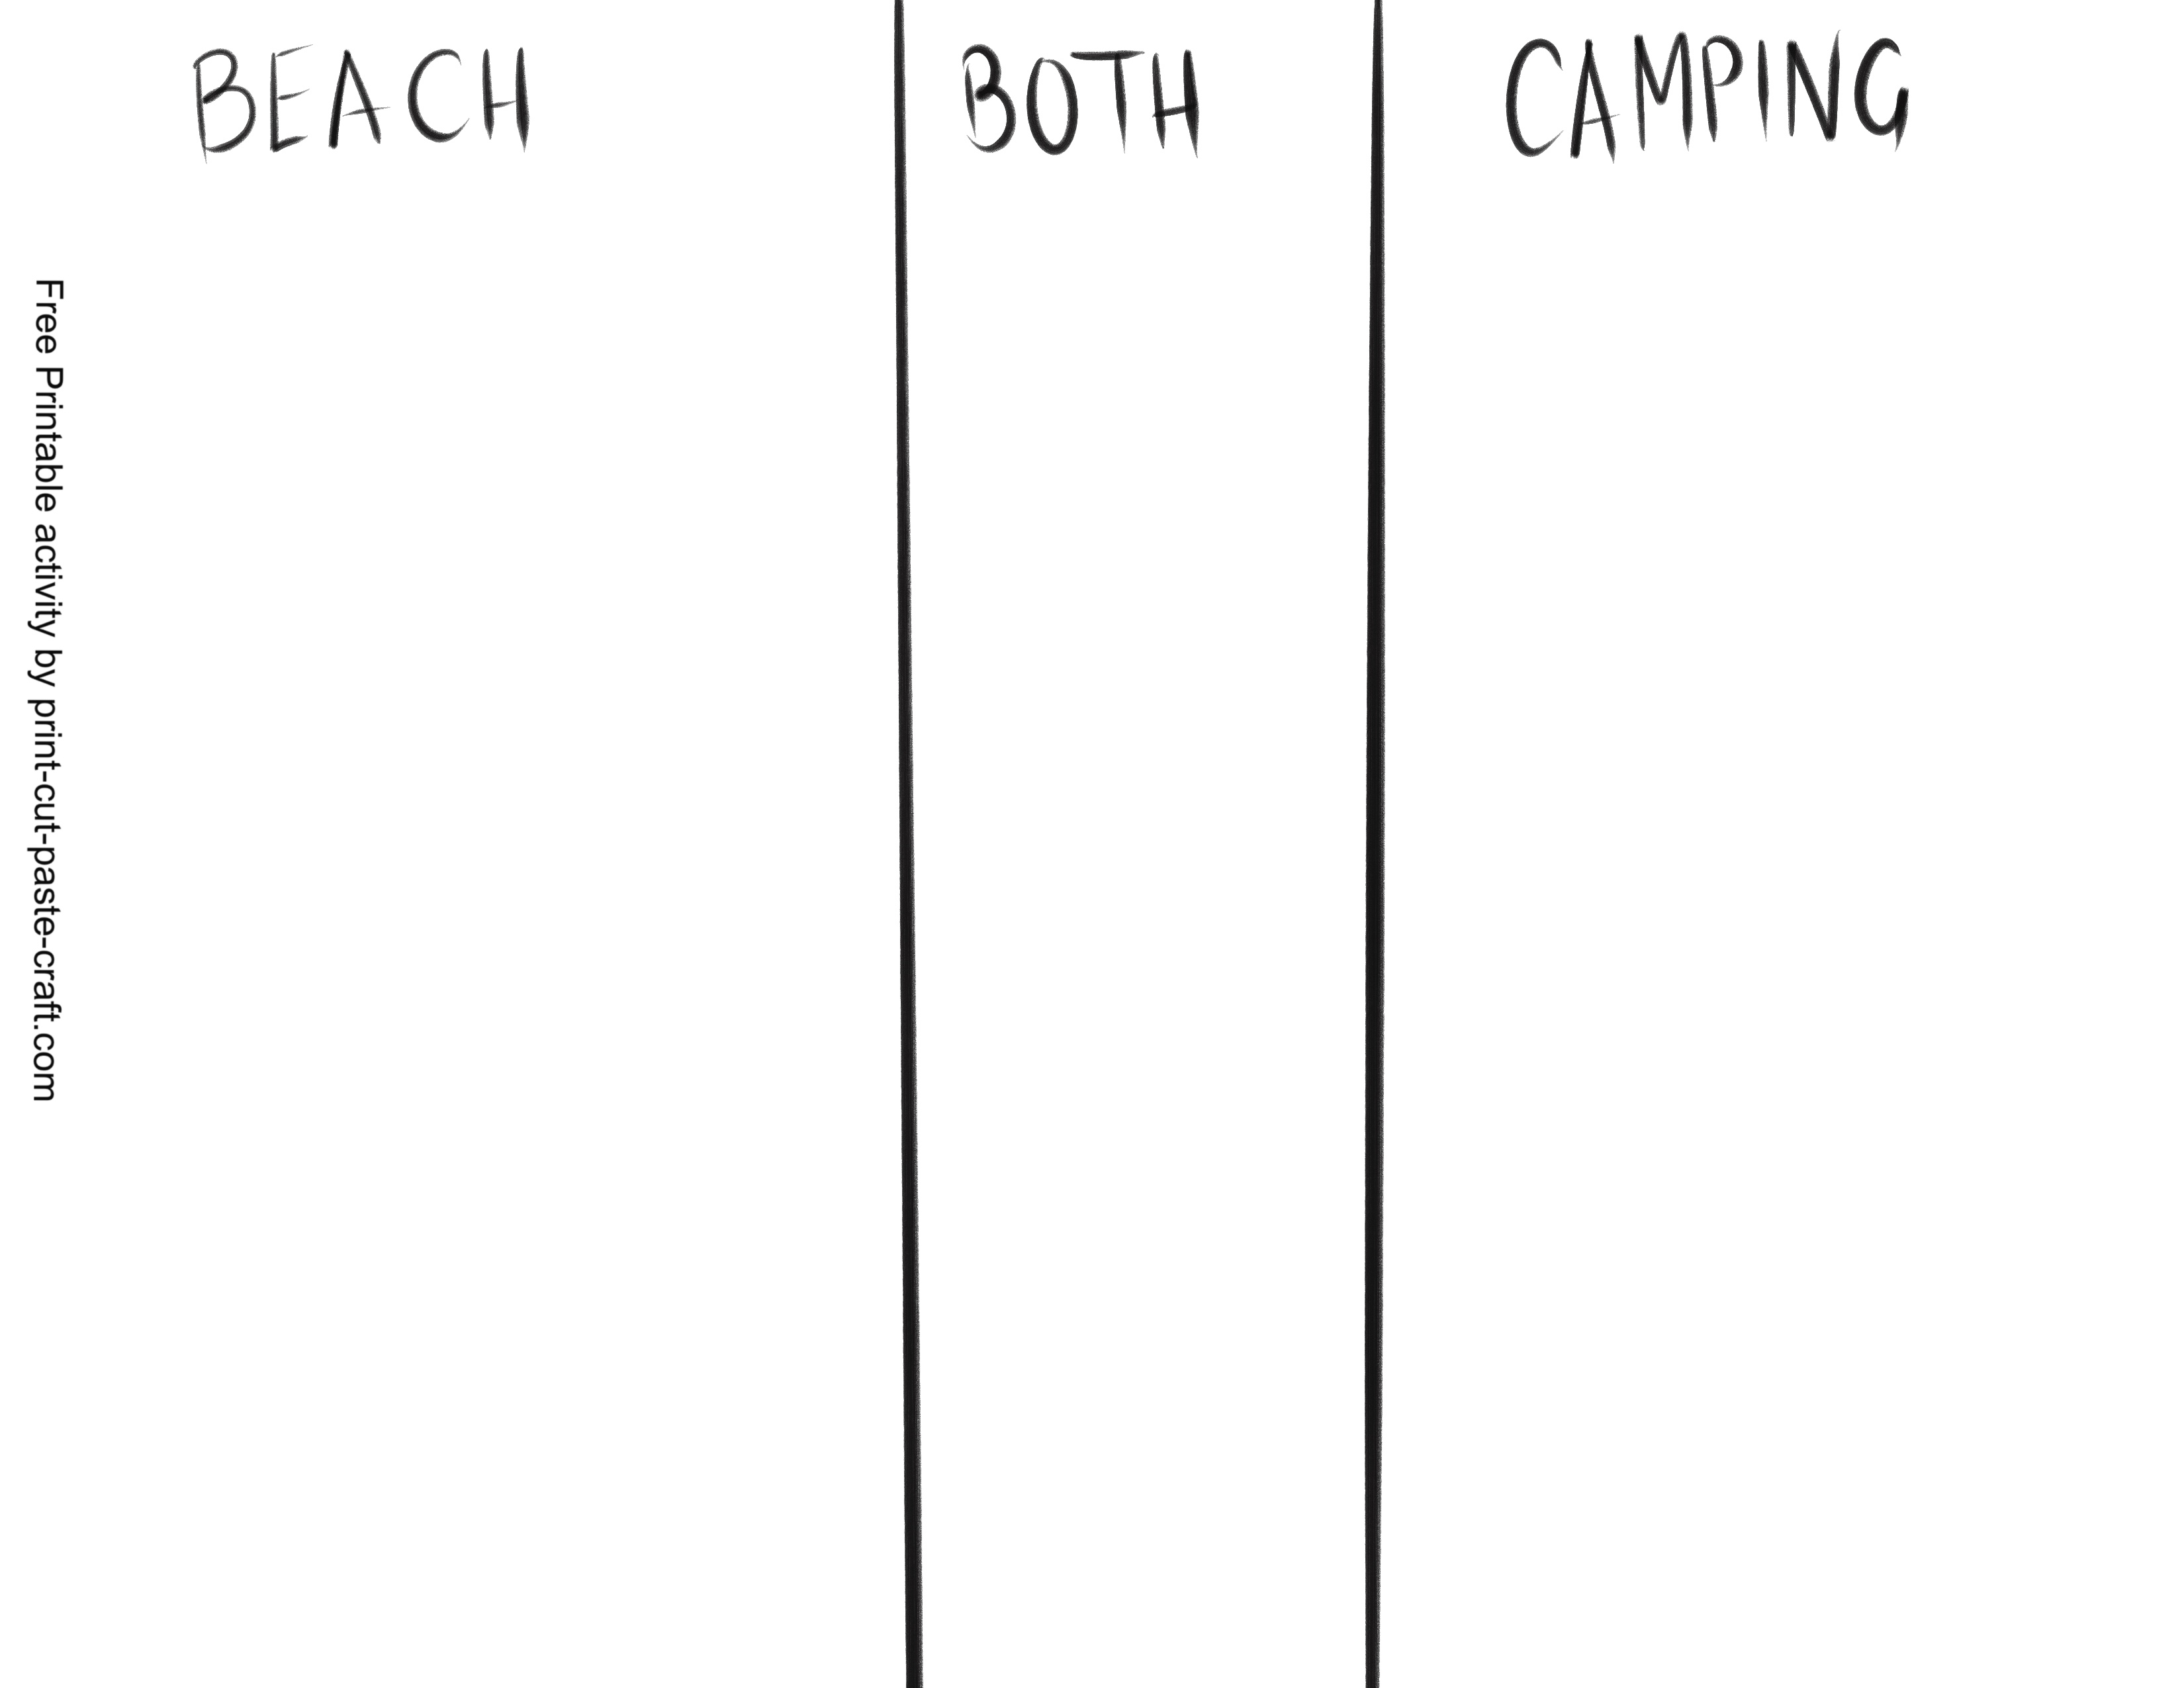 Beach or Camping free printable coloring and sorting activity for kids CHART by Print-Cut-Paste-Craft.com